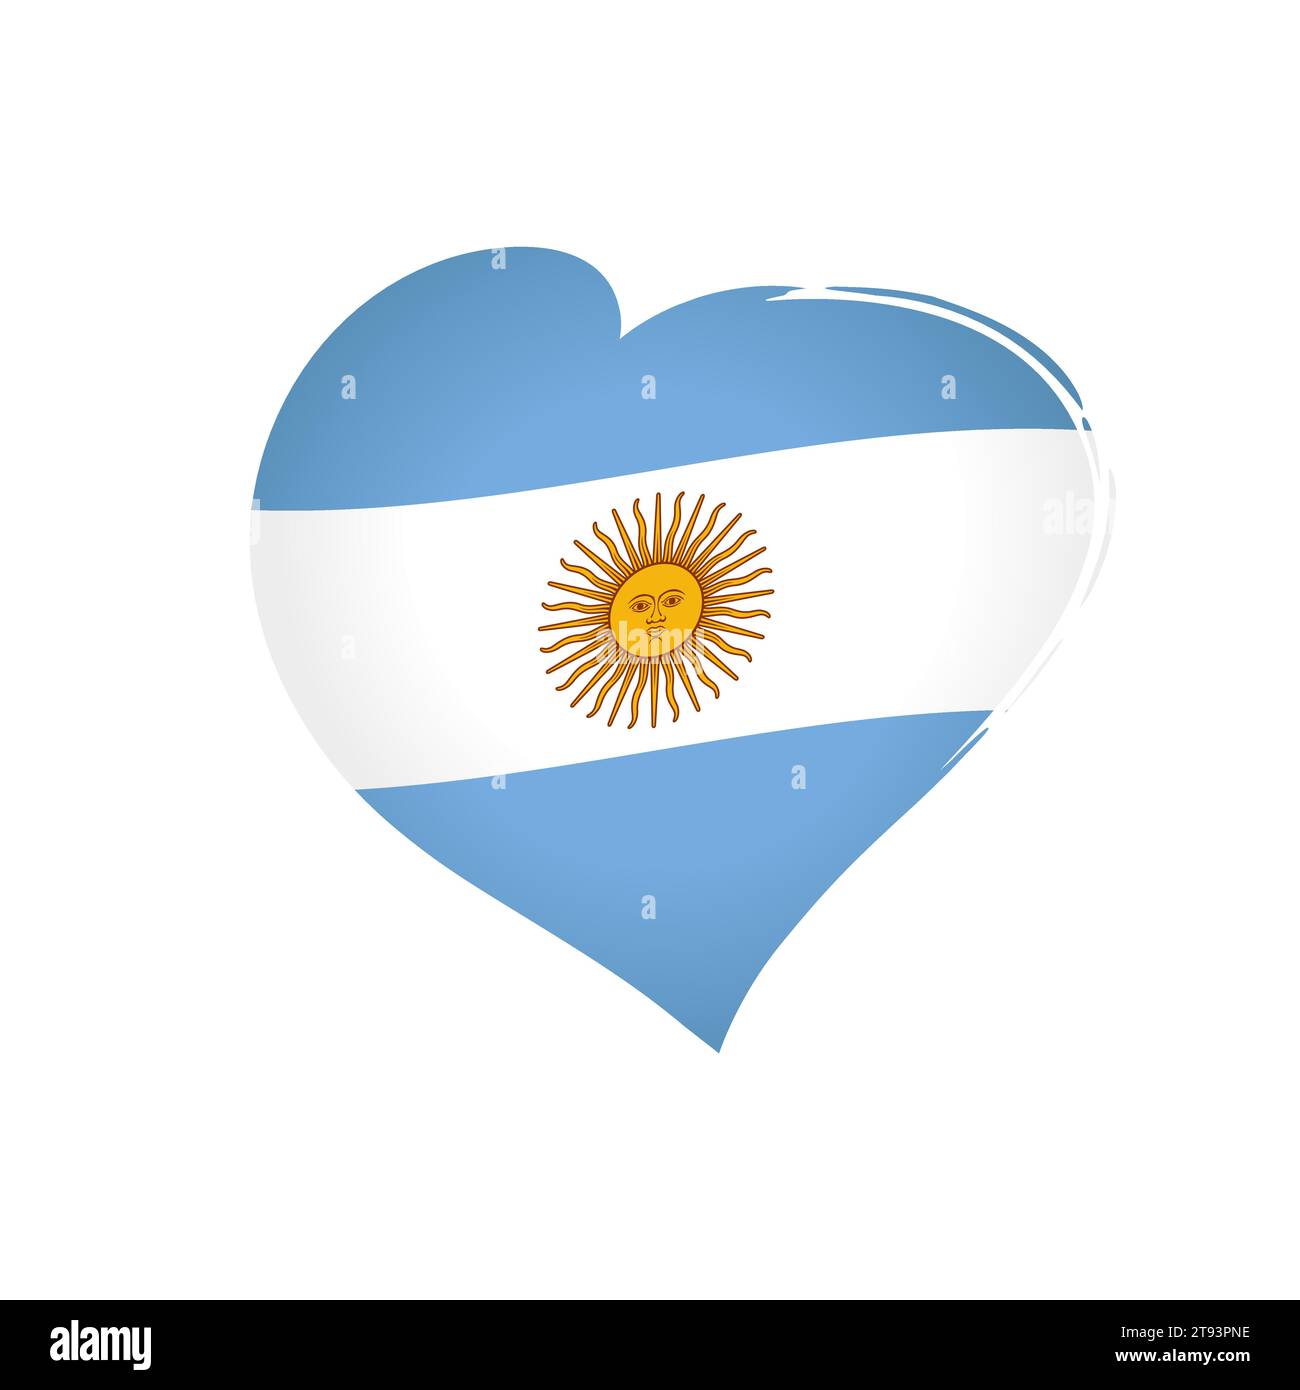 Creative heart shape with Argentinean state flag. Love Argentina symbol. Celebration of election idea. Sports logo concept. Isolated icon. Souvenir Stock Vector